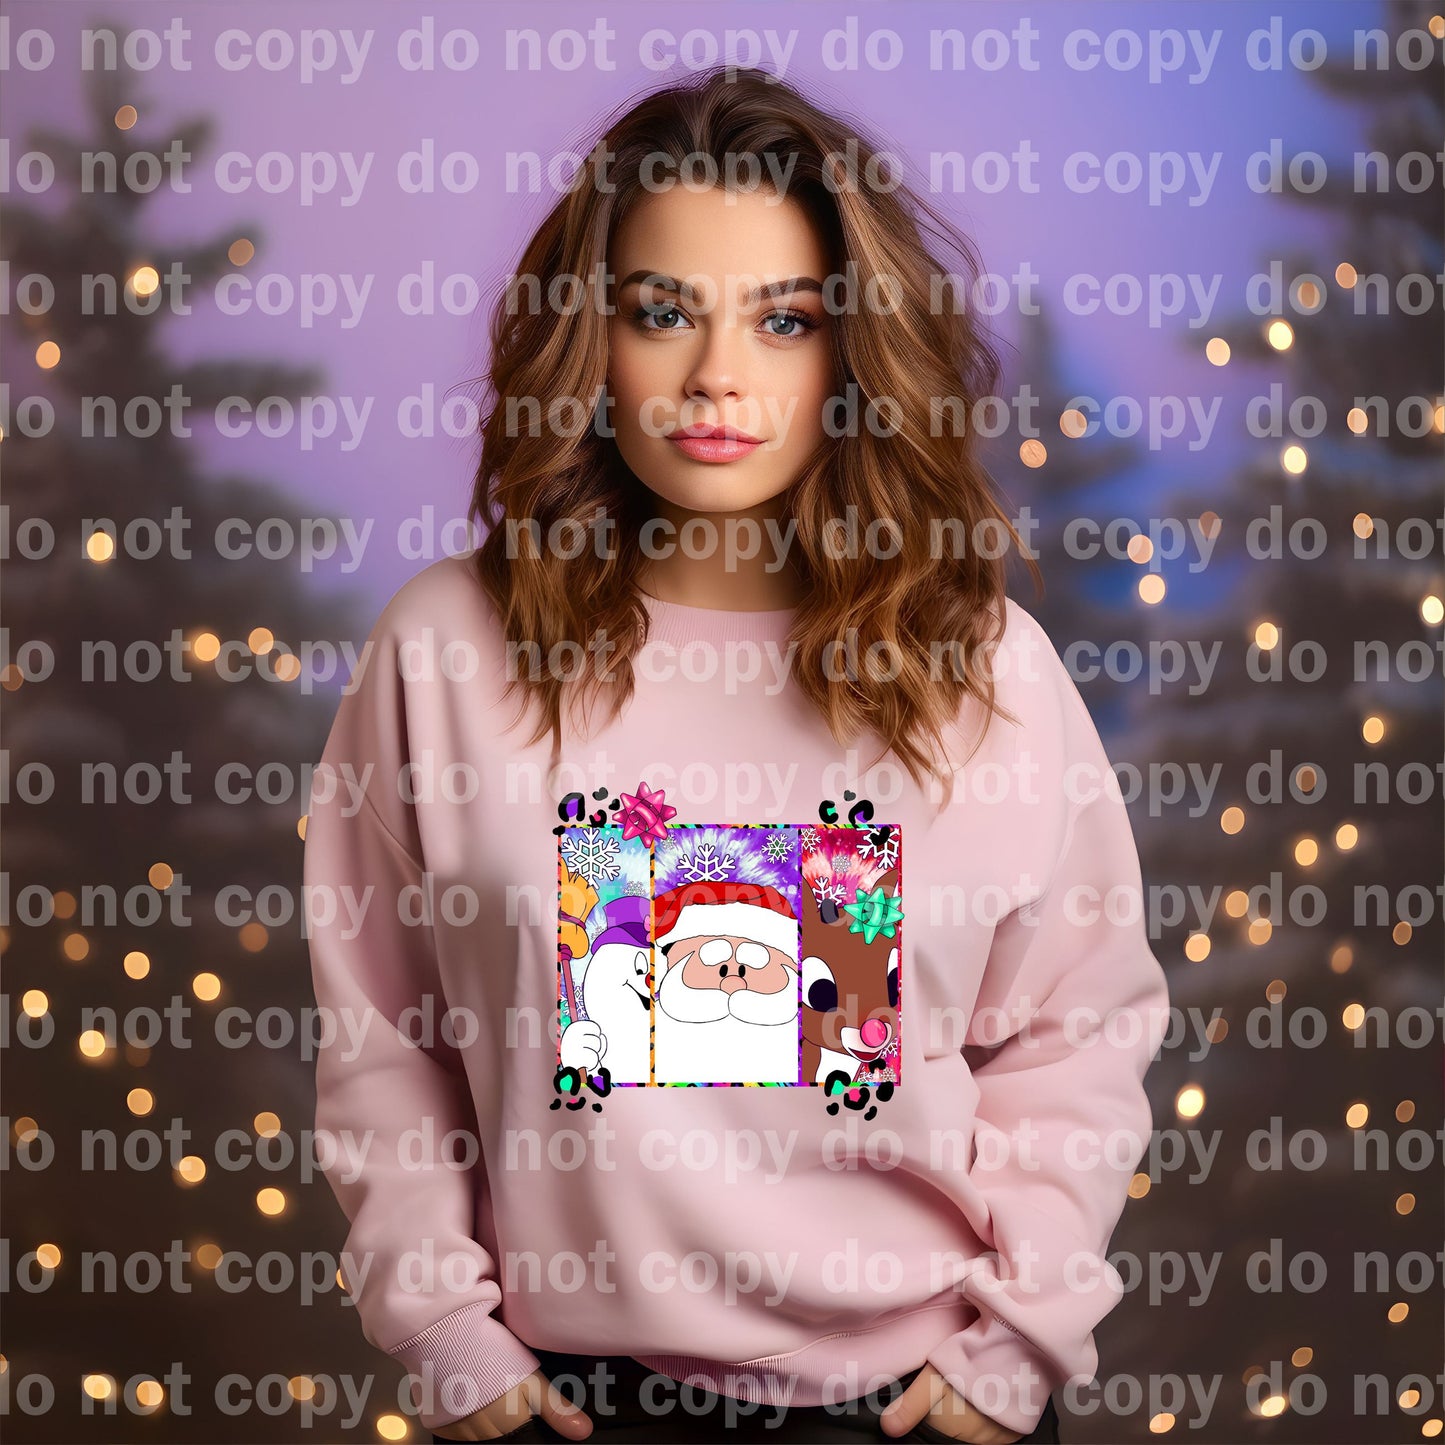 Classic Christmas Dream Print or Sublimation Print